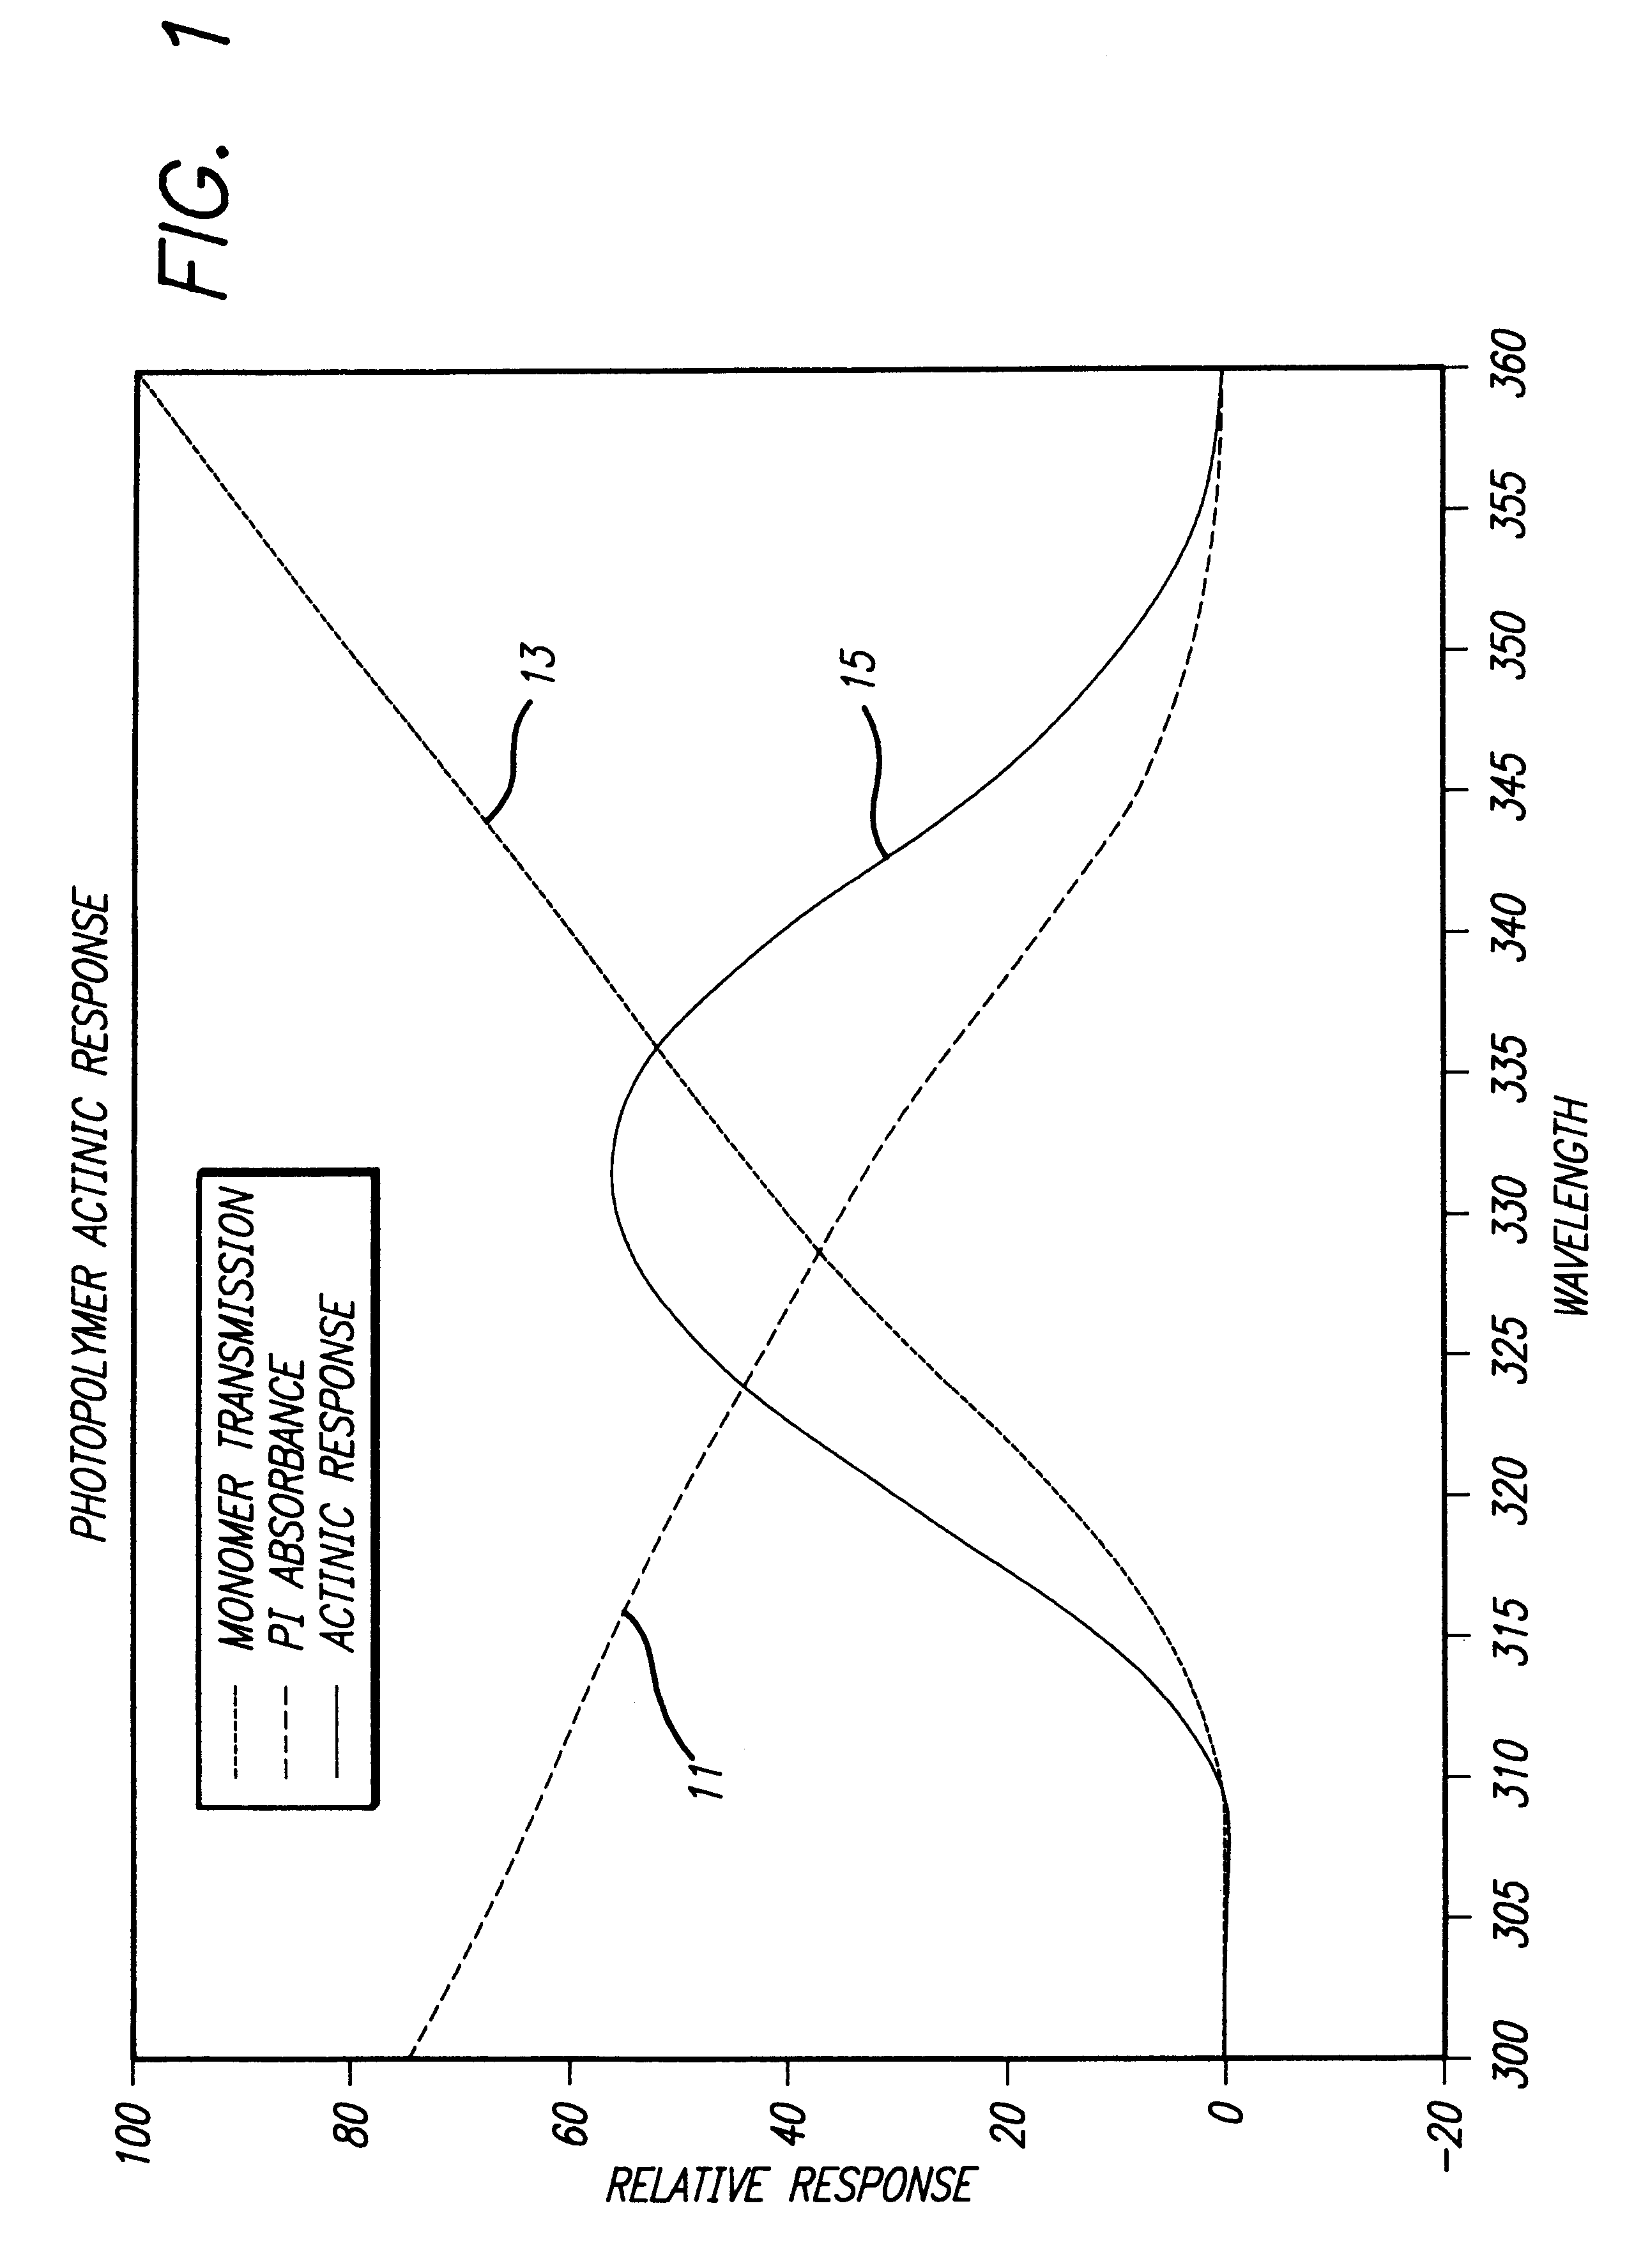 Apparatus and method for forming three-dimensional objects in stereolithography utilizing a laser exposure system with a diode pumped frequency-multiplied solid state laser